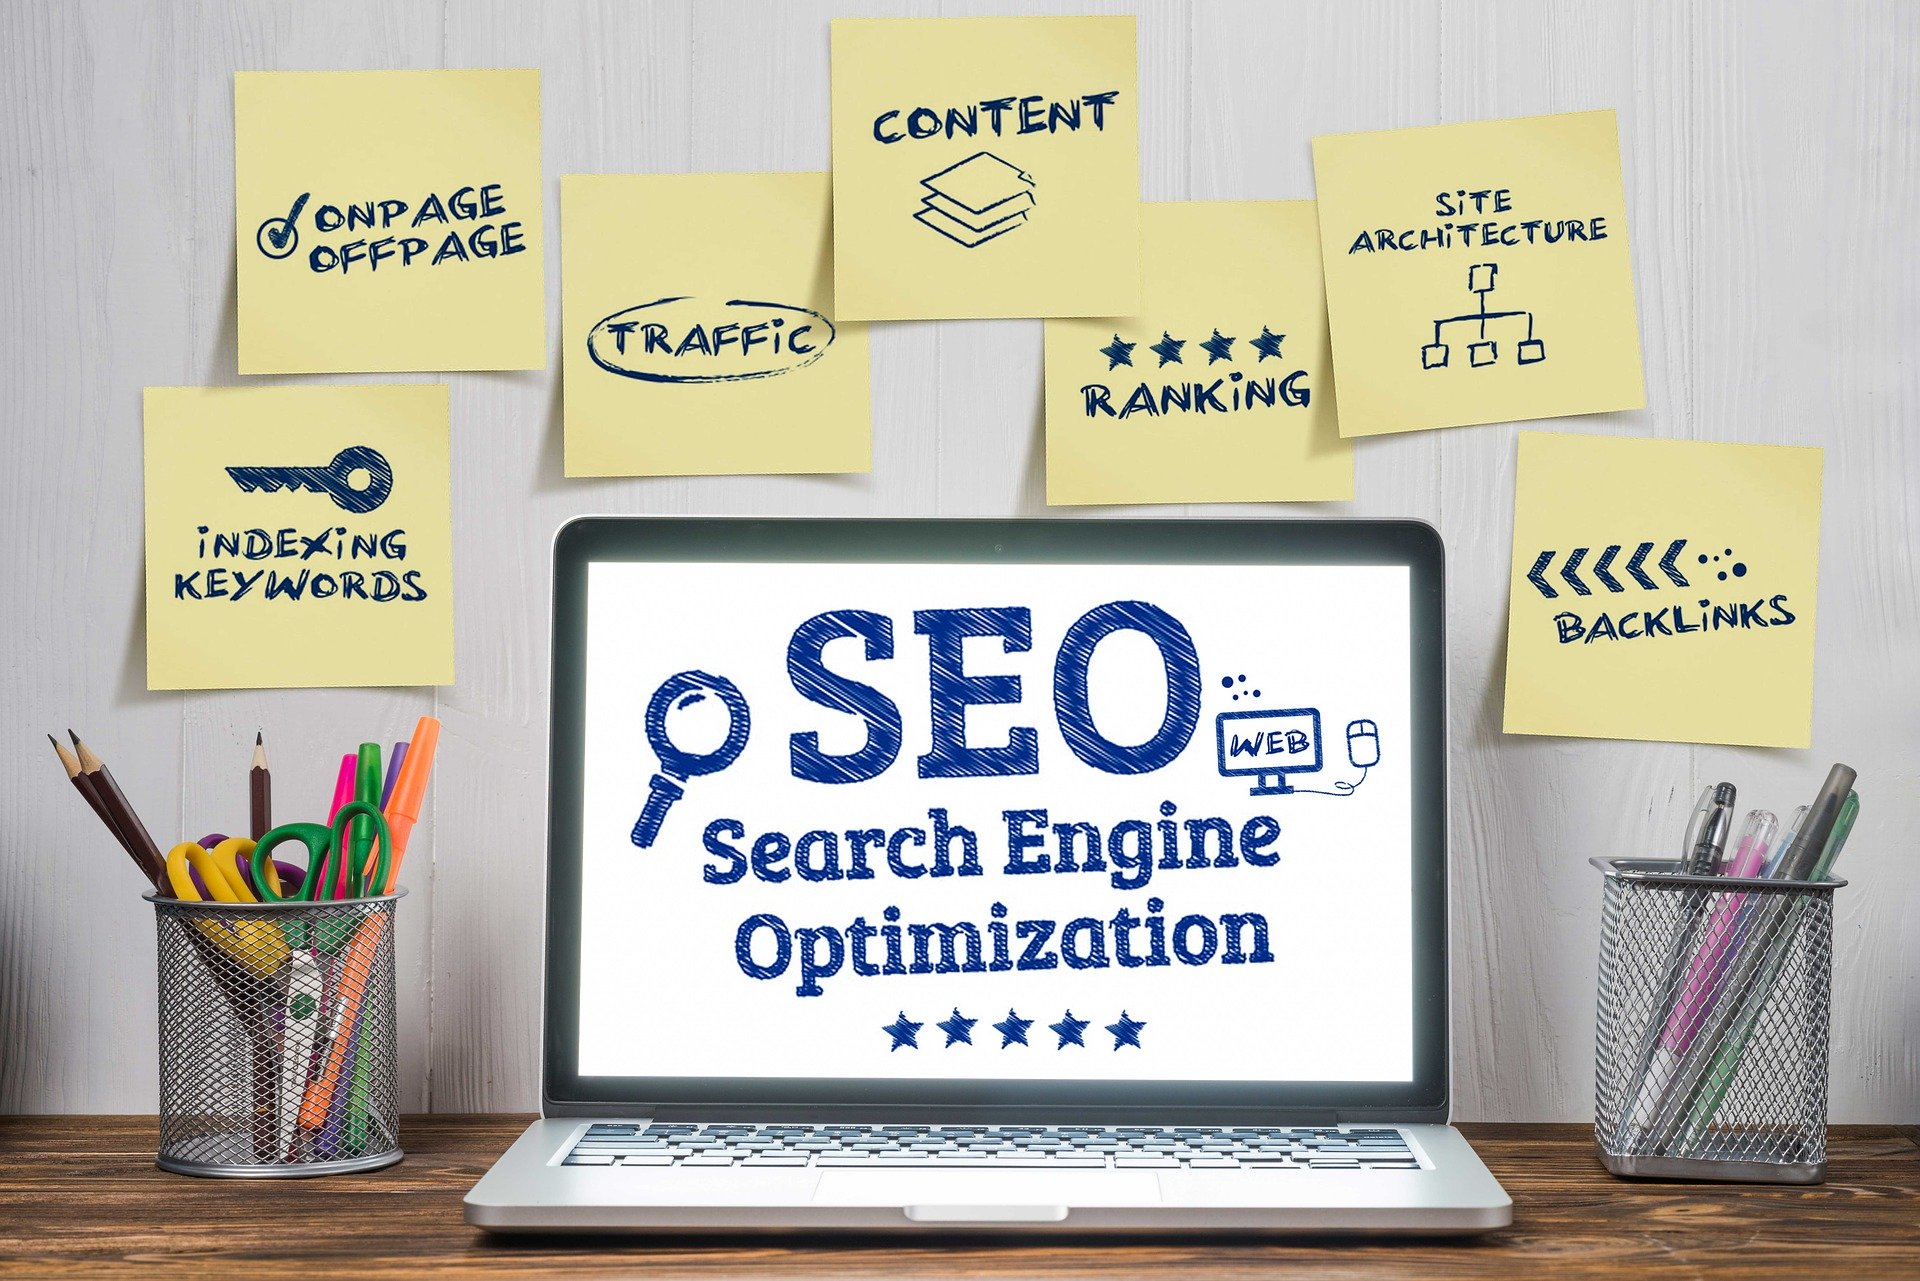 Why do hotel business websites need SEO services?